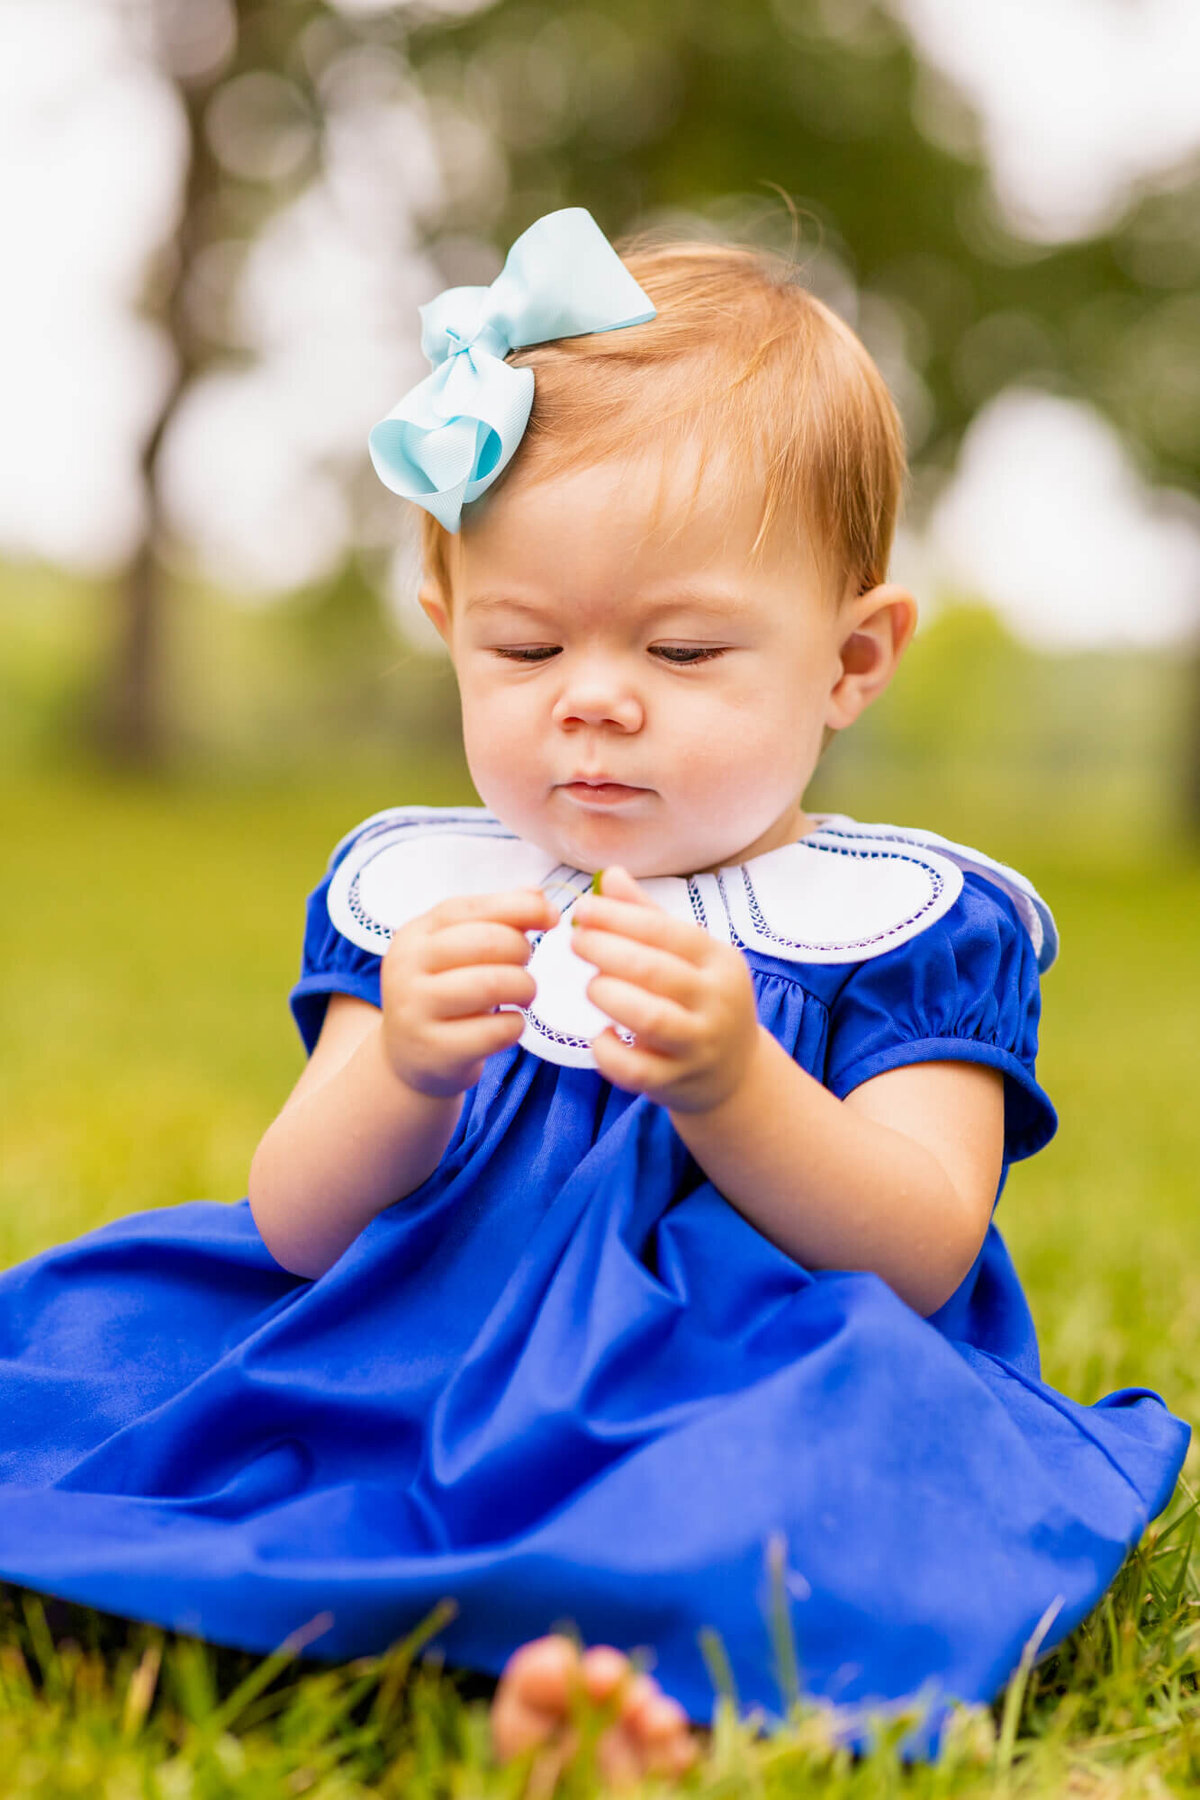 little girl in a blue dress sitting in the grass holding a flower